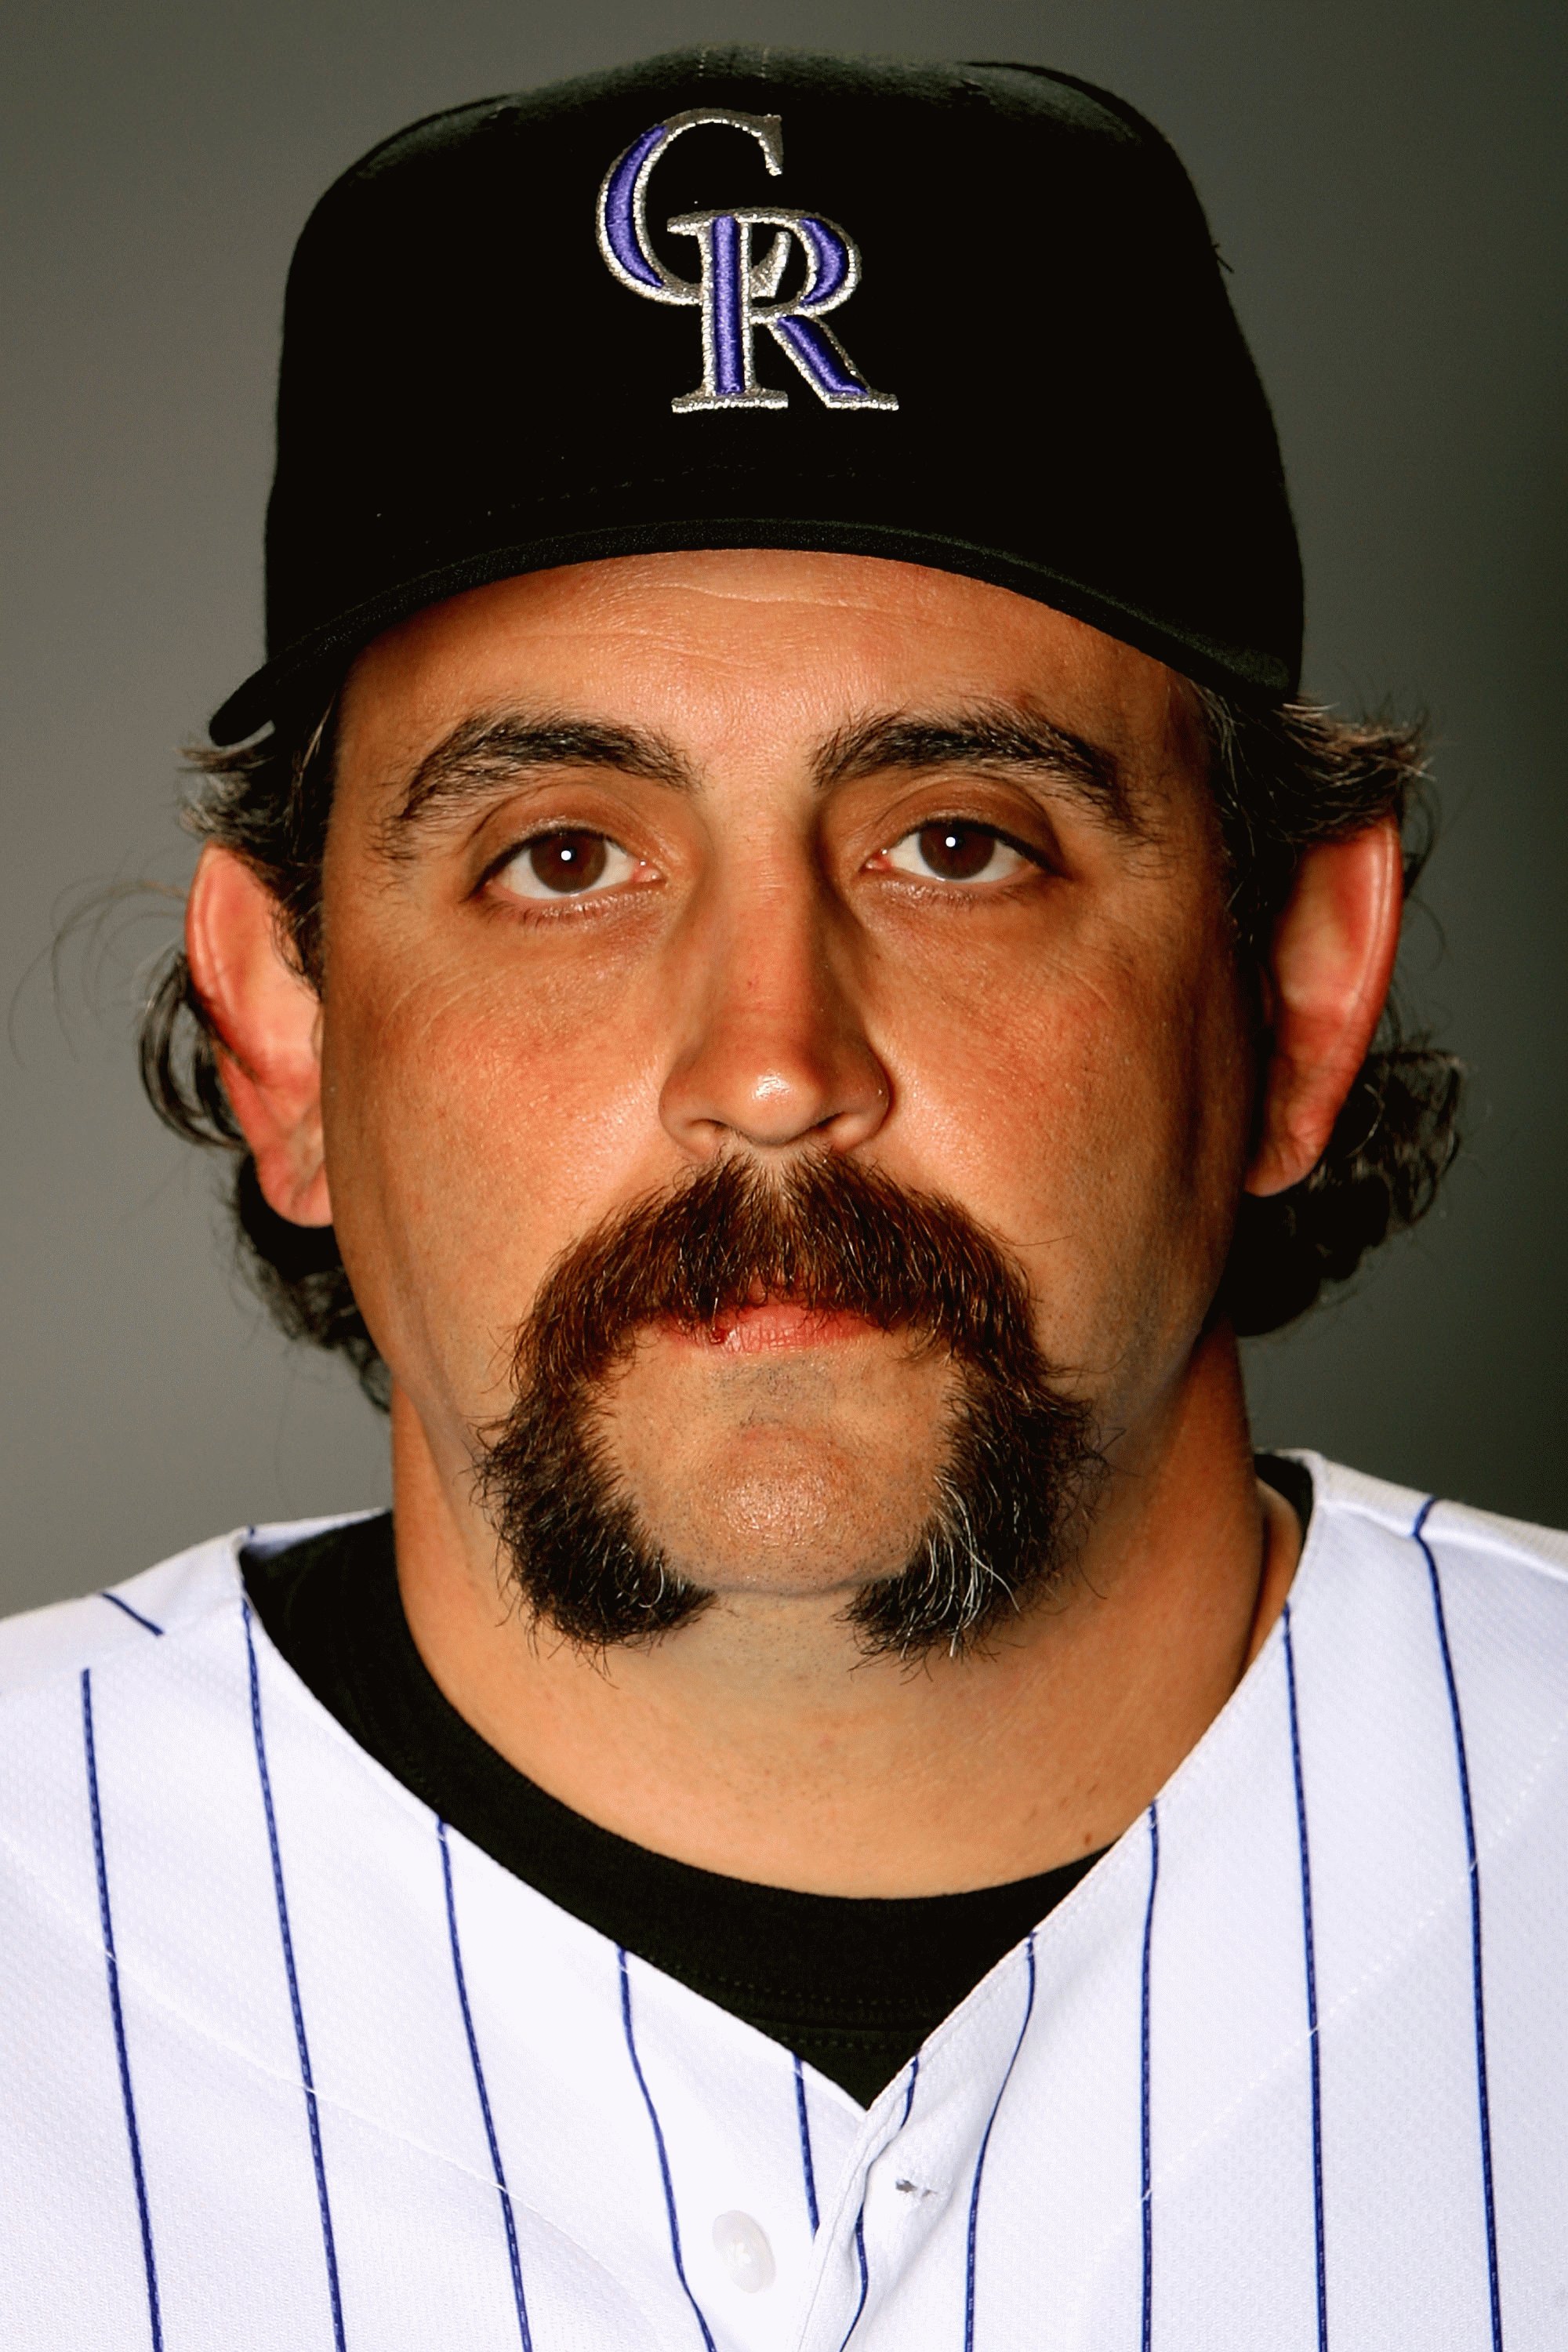 Great year for MLB pitcher mustaches : r/baseball